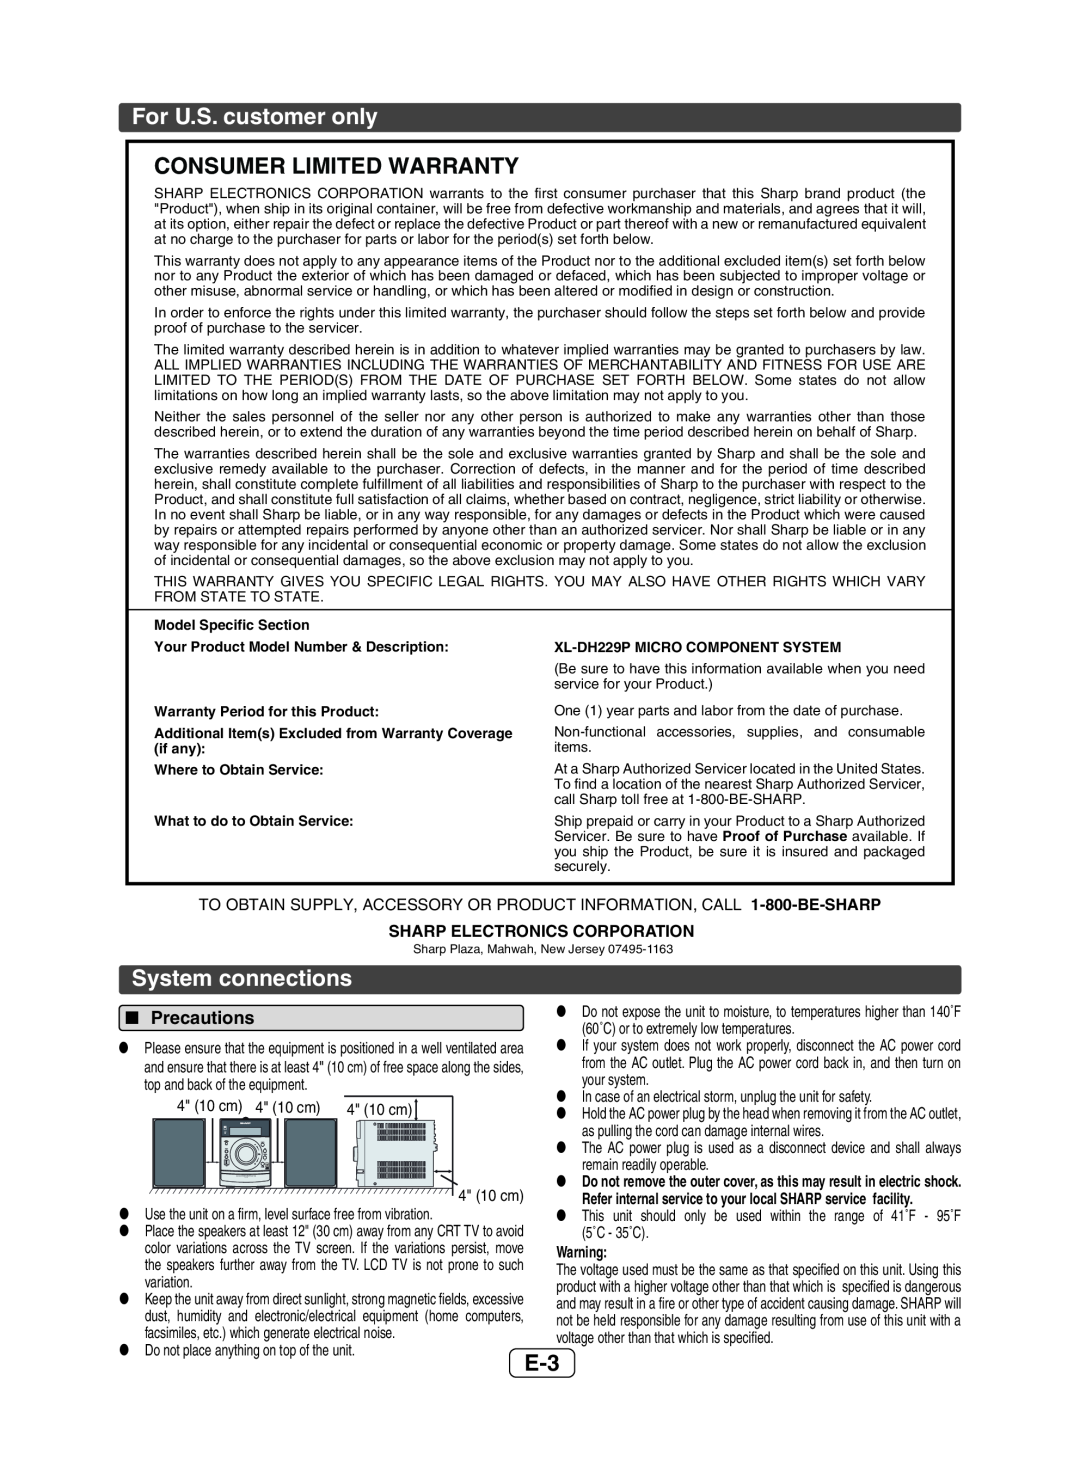 Sharp XL-DH229 operation manual For U.S. customer only, Consumer Limited Warranty, System connections, QPrecautions 